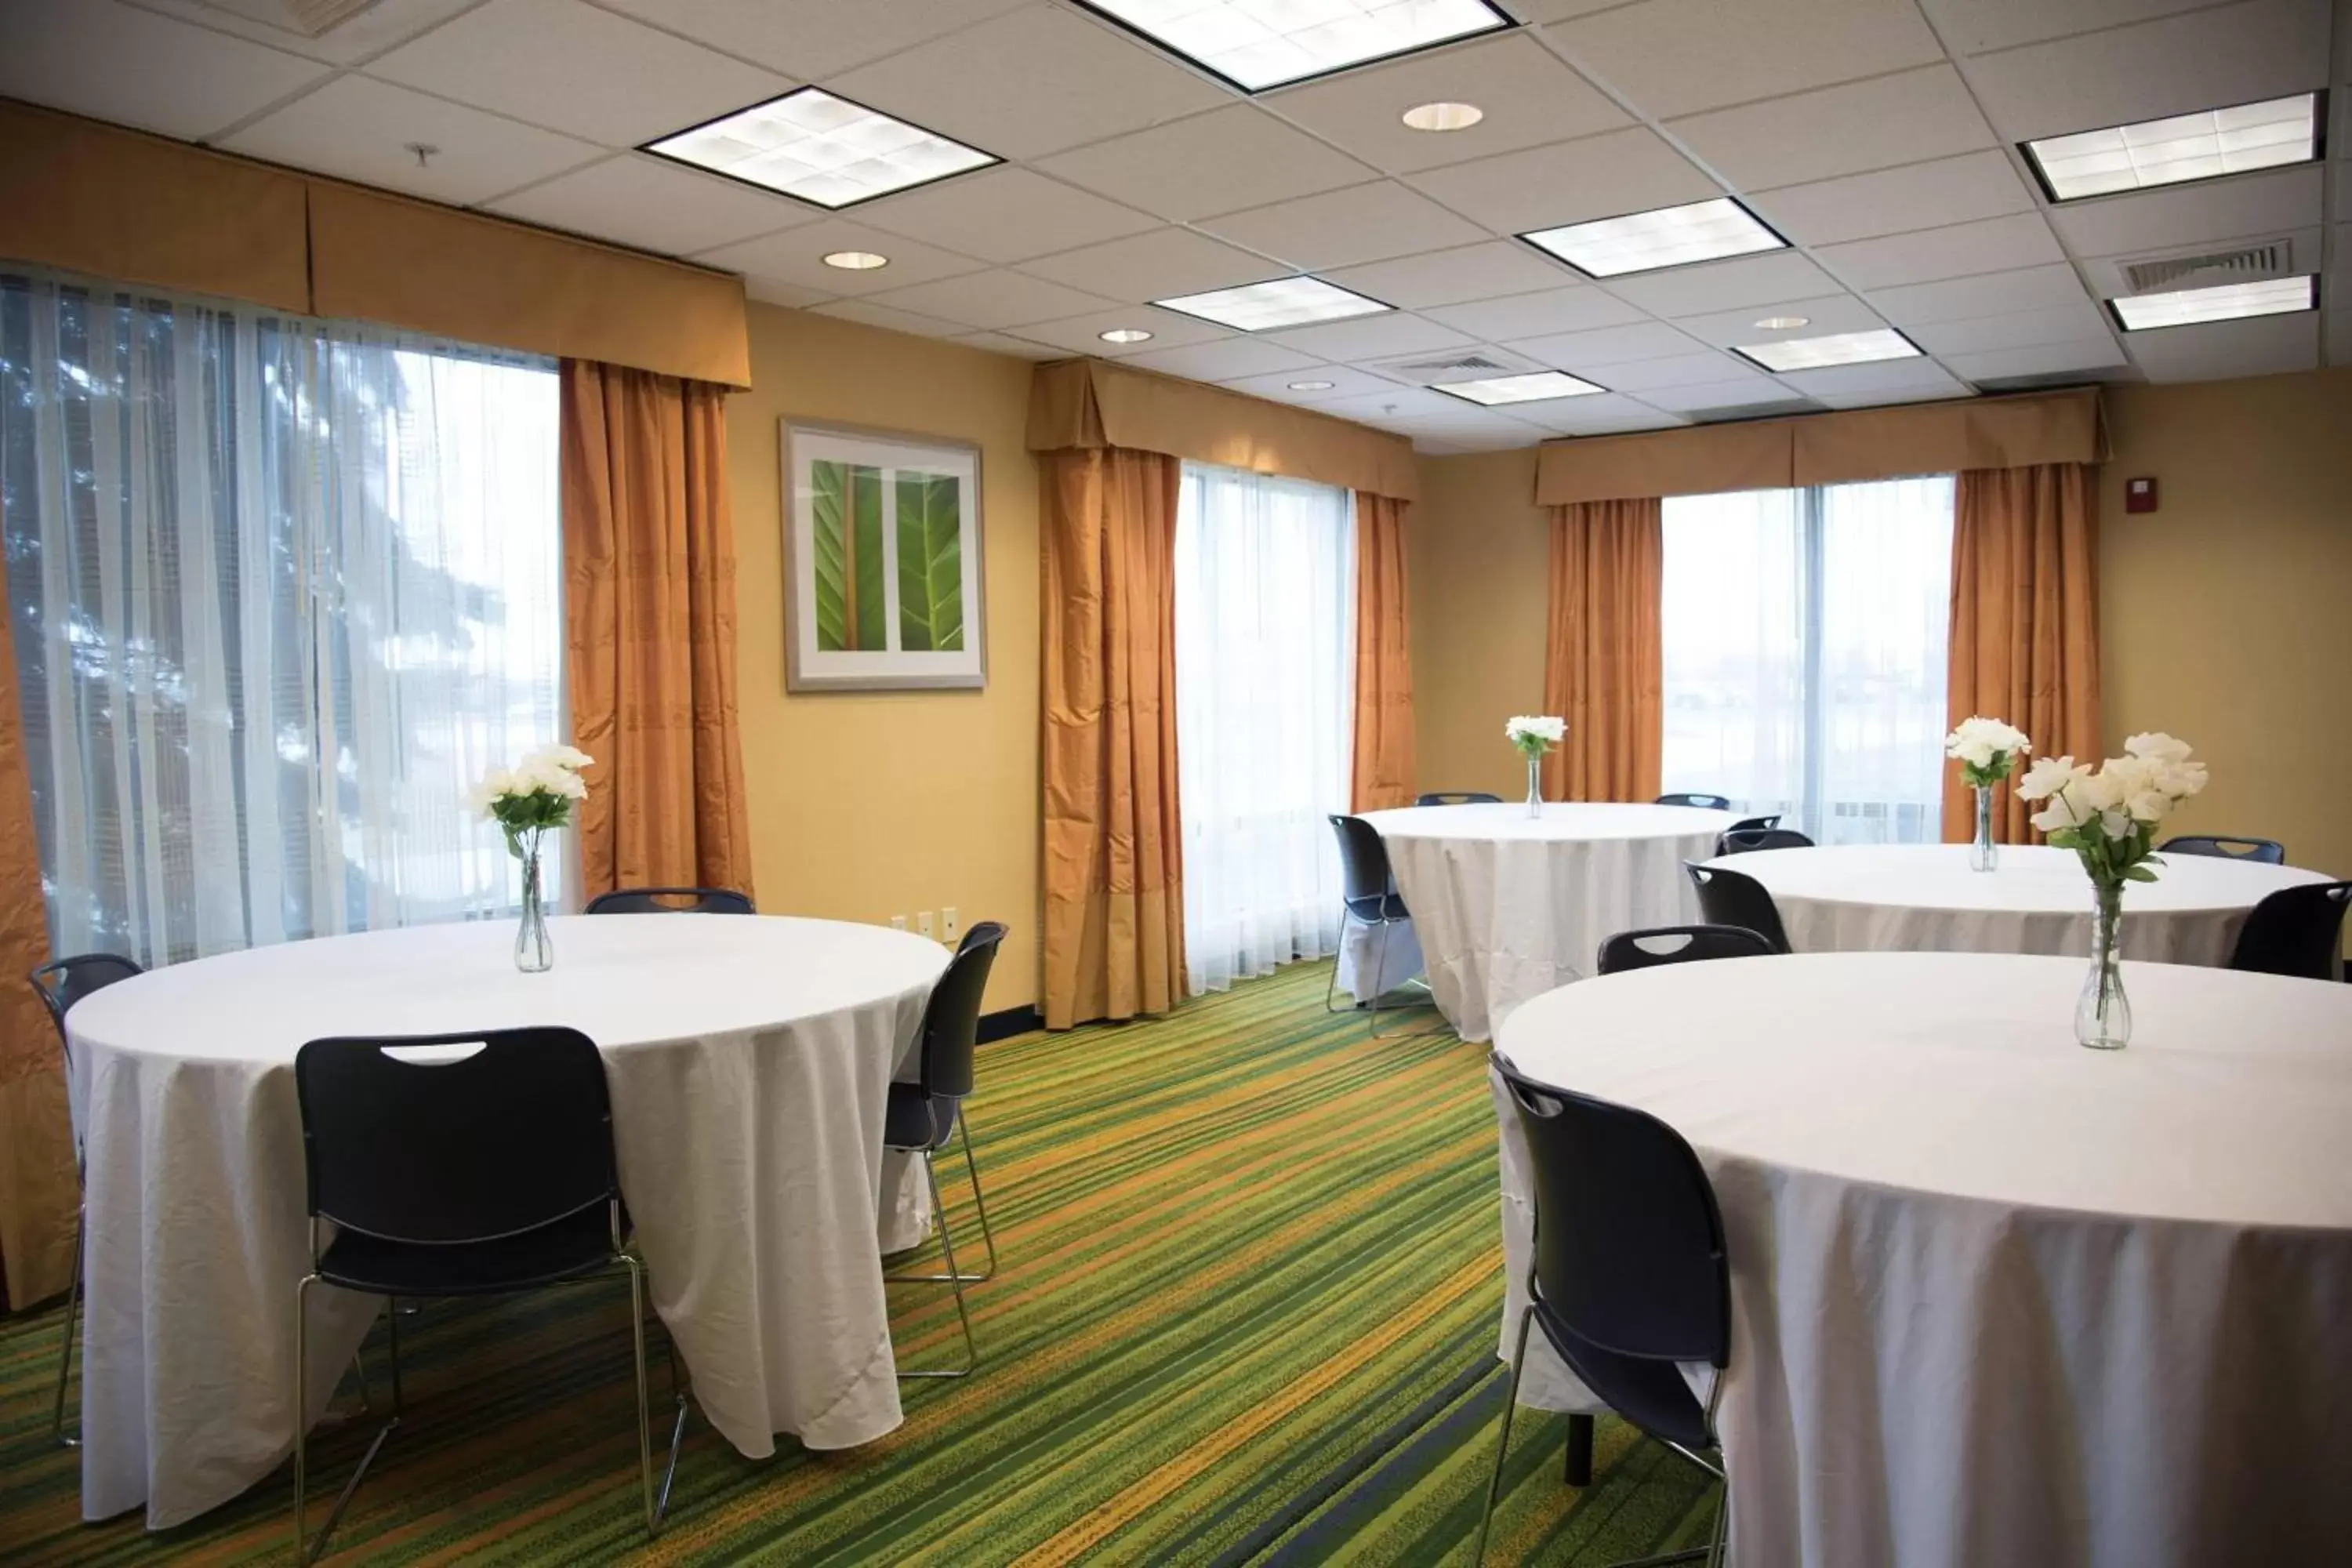 Meeting/conference room, Banquet Facilities in Fairfield Inn & Suites by Marriott Muskegon Norton Shores